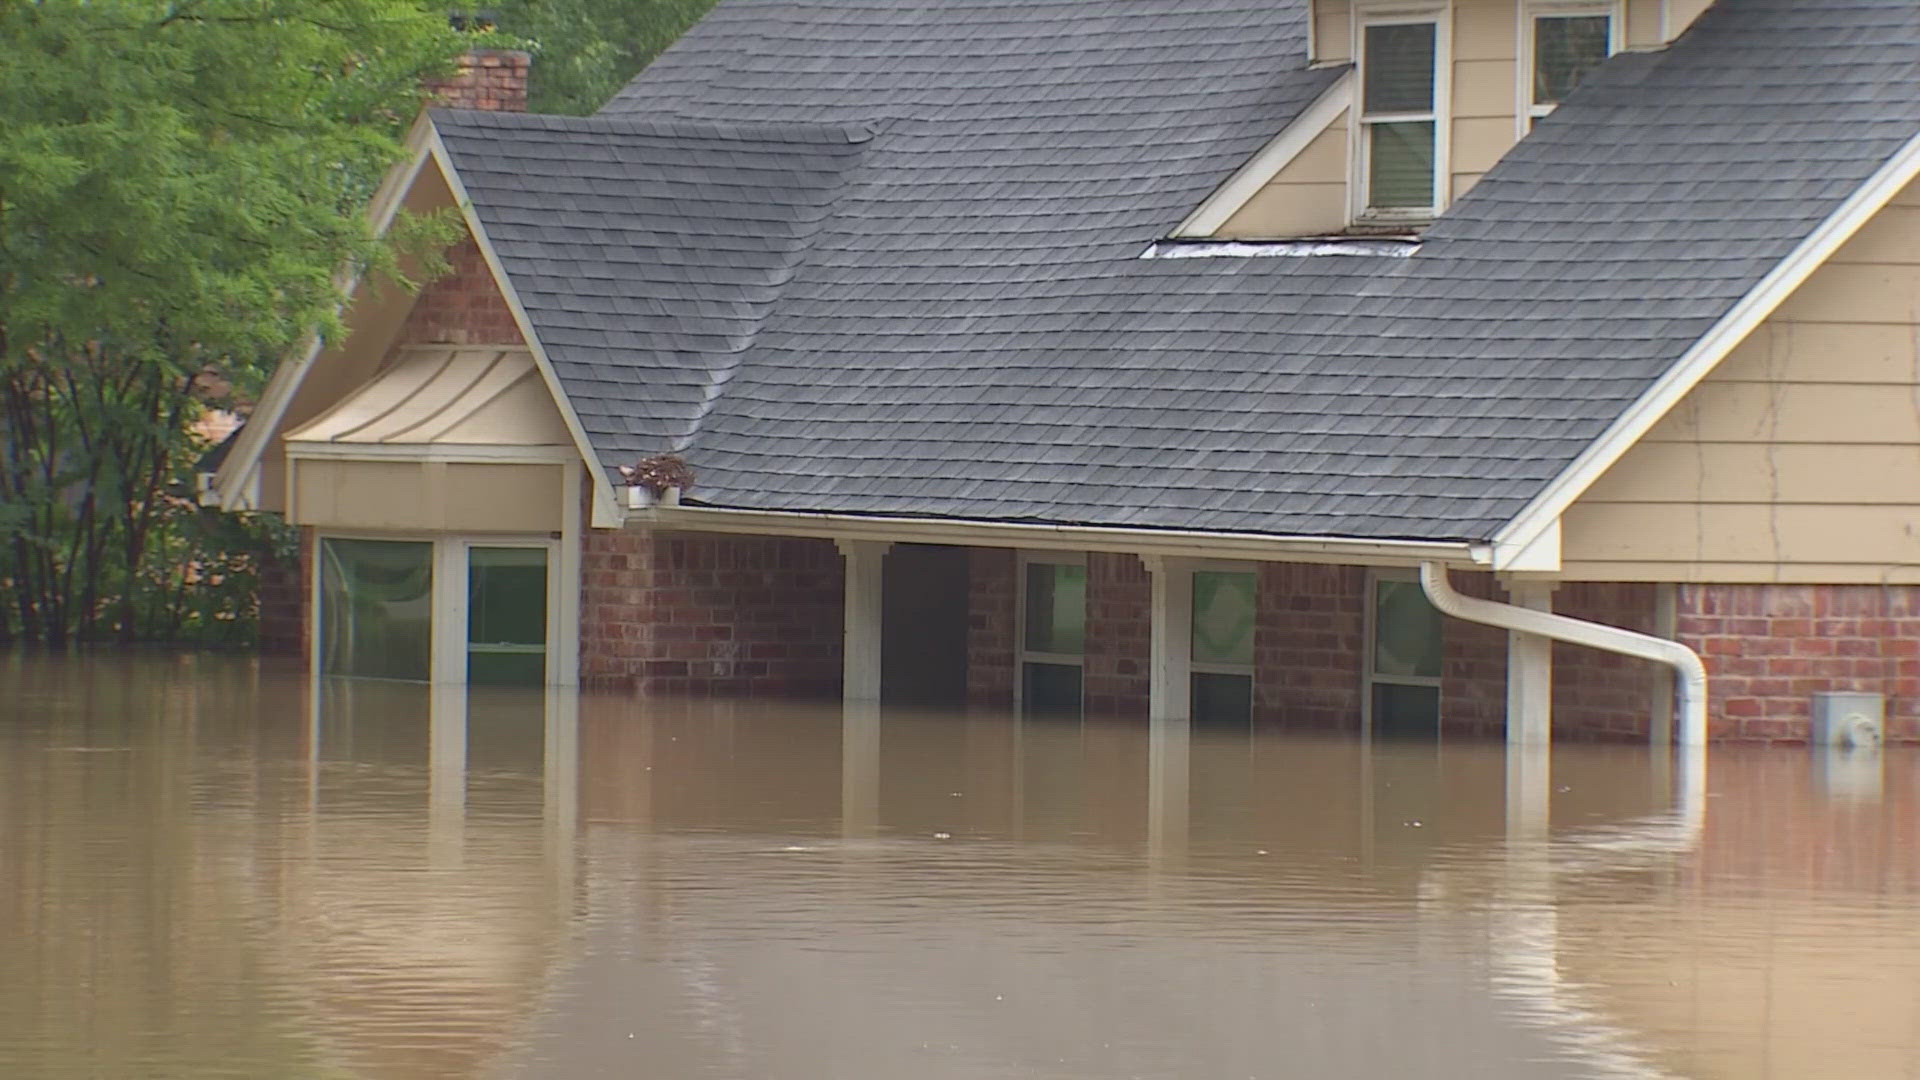 The Caney Creek Fire and Rescue crew said they haven't slept as they make sure everyone gets out of flooded neighborhoods safely.